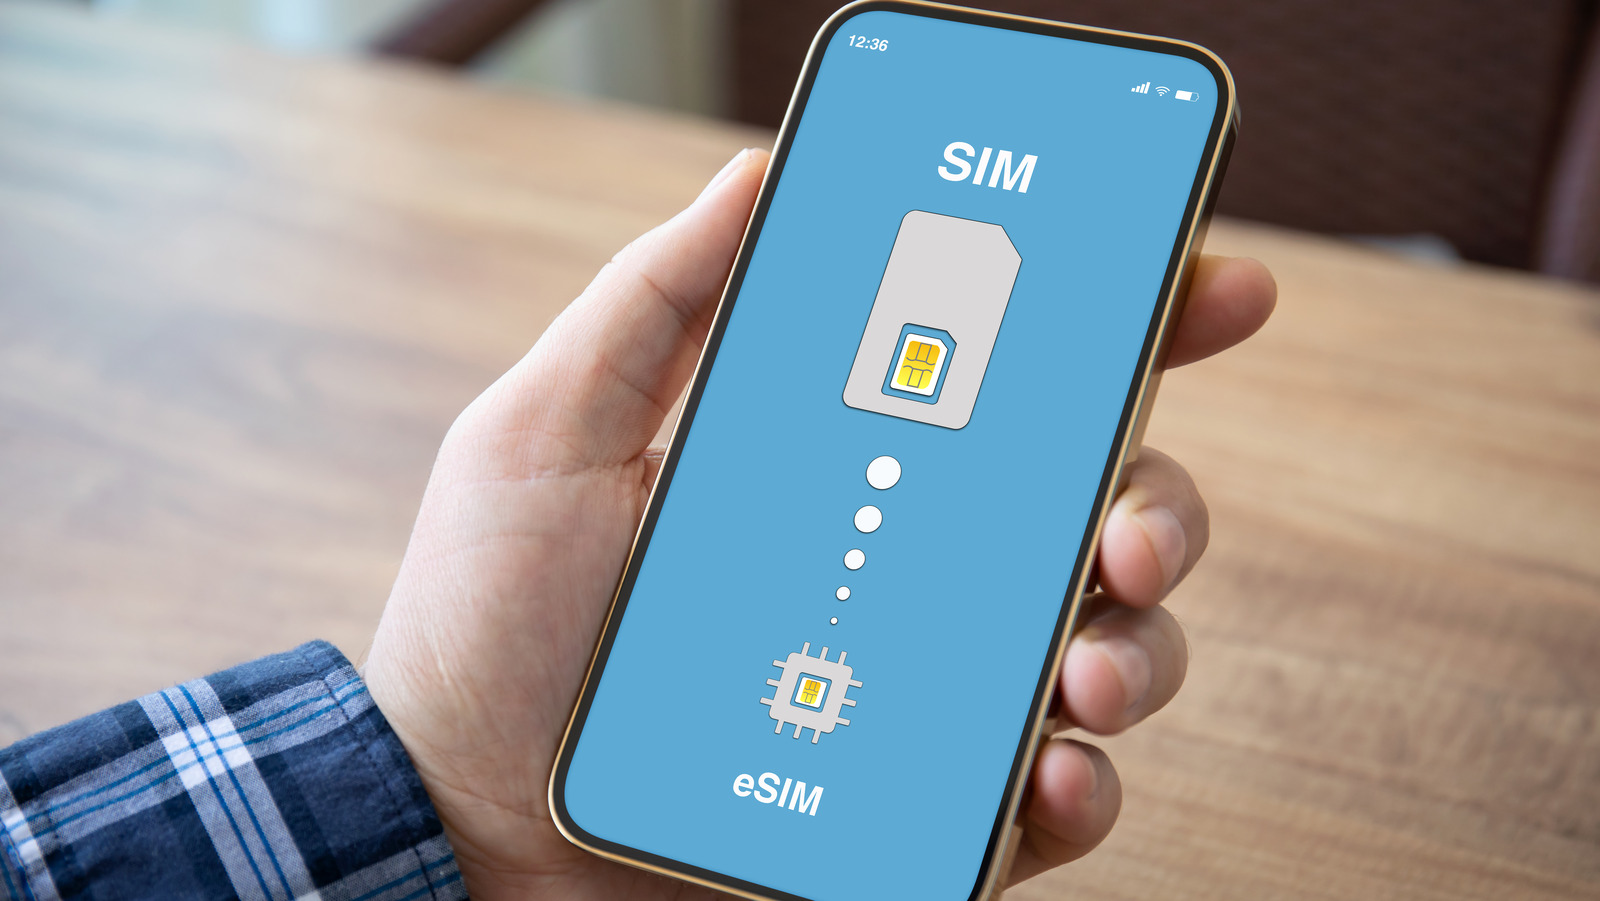 eSIM Market Growth 2022, Industry Trends, Size, Opportunities and Forecast Report by 2027